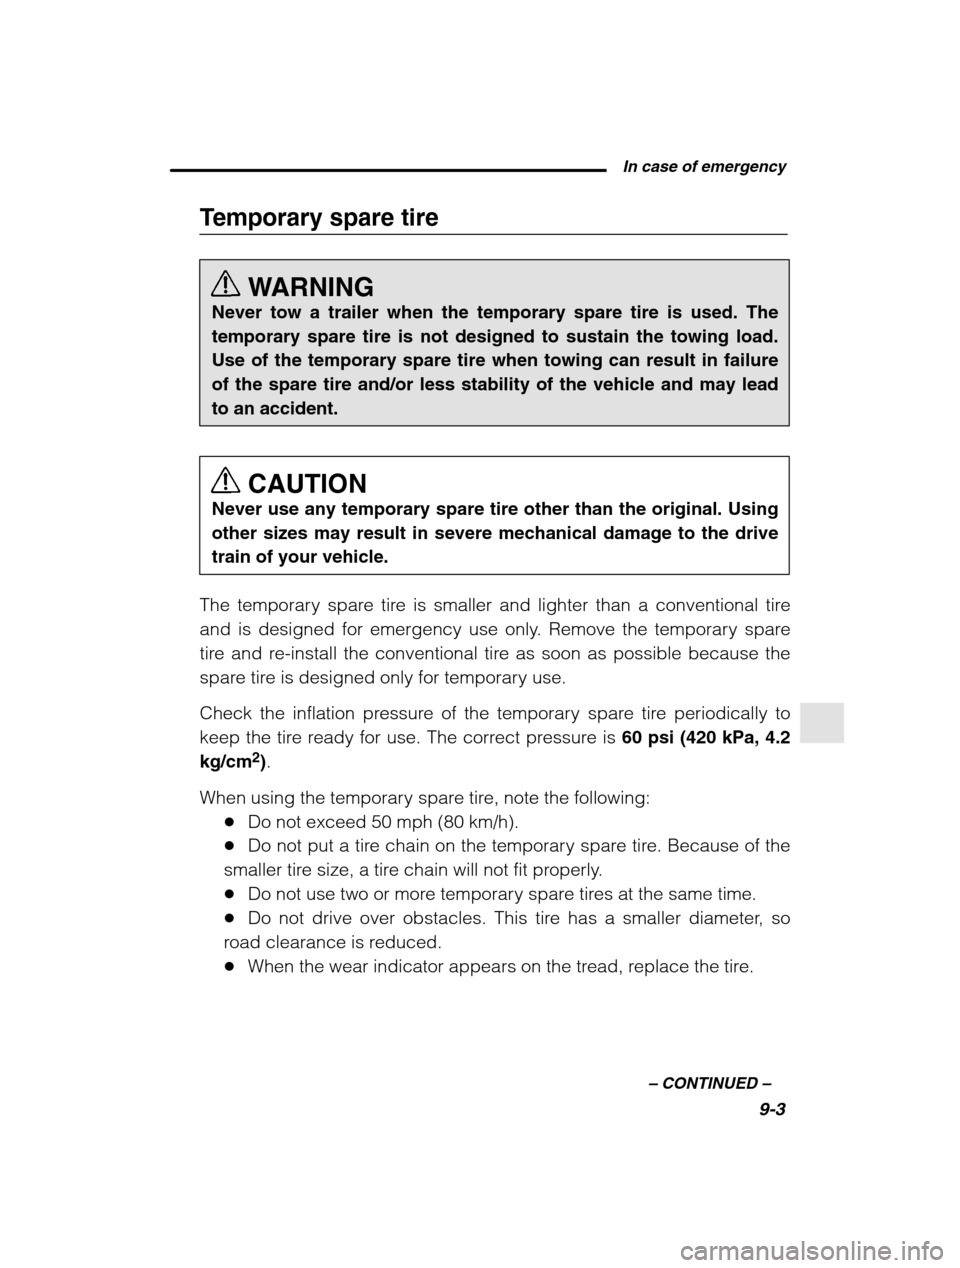 SUBARU LEGACY 2002 3.G Owners Manual  In case of emergency9-3
–
 CONTINUED  –
Temporary spare tire
WARNING
Never tow a trailer when the temporary spare tire is used. The temporary spare tire is not designed to sustain the towing load